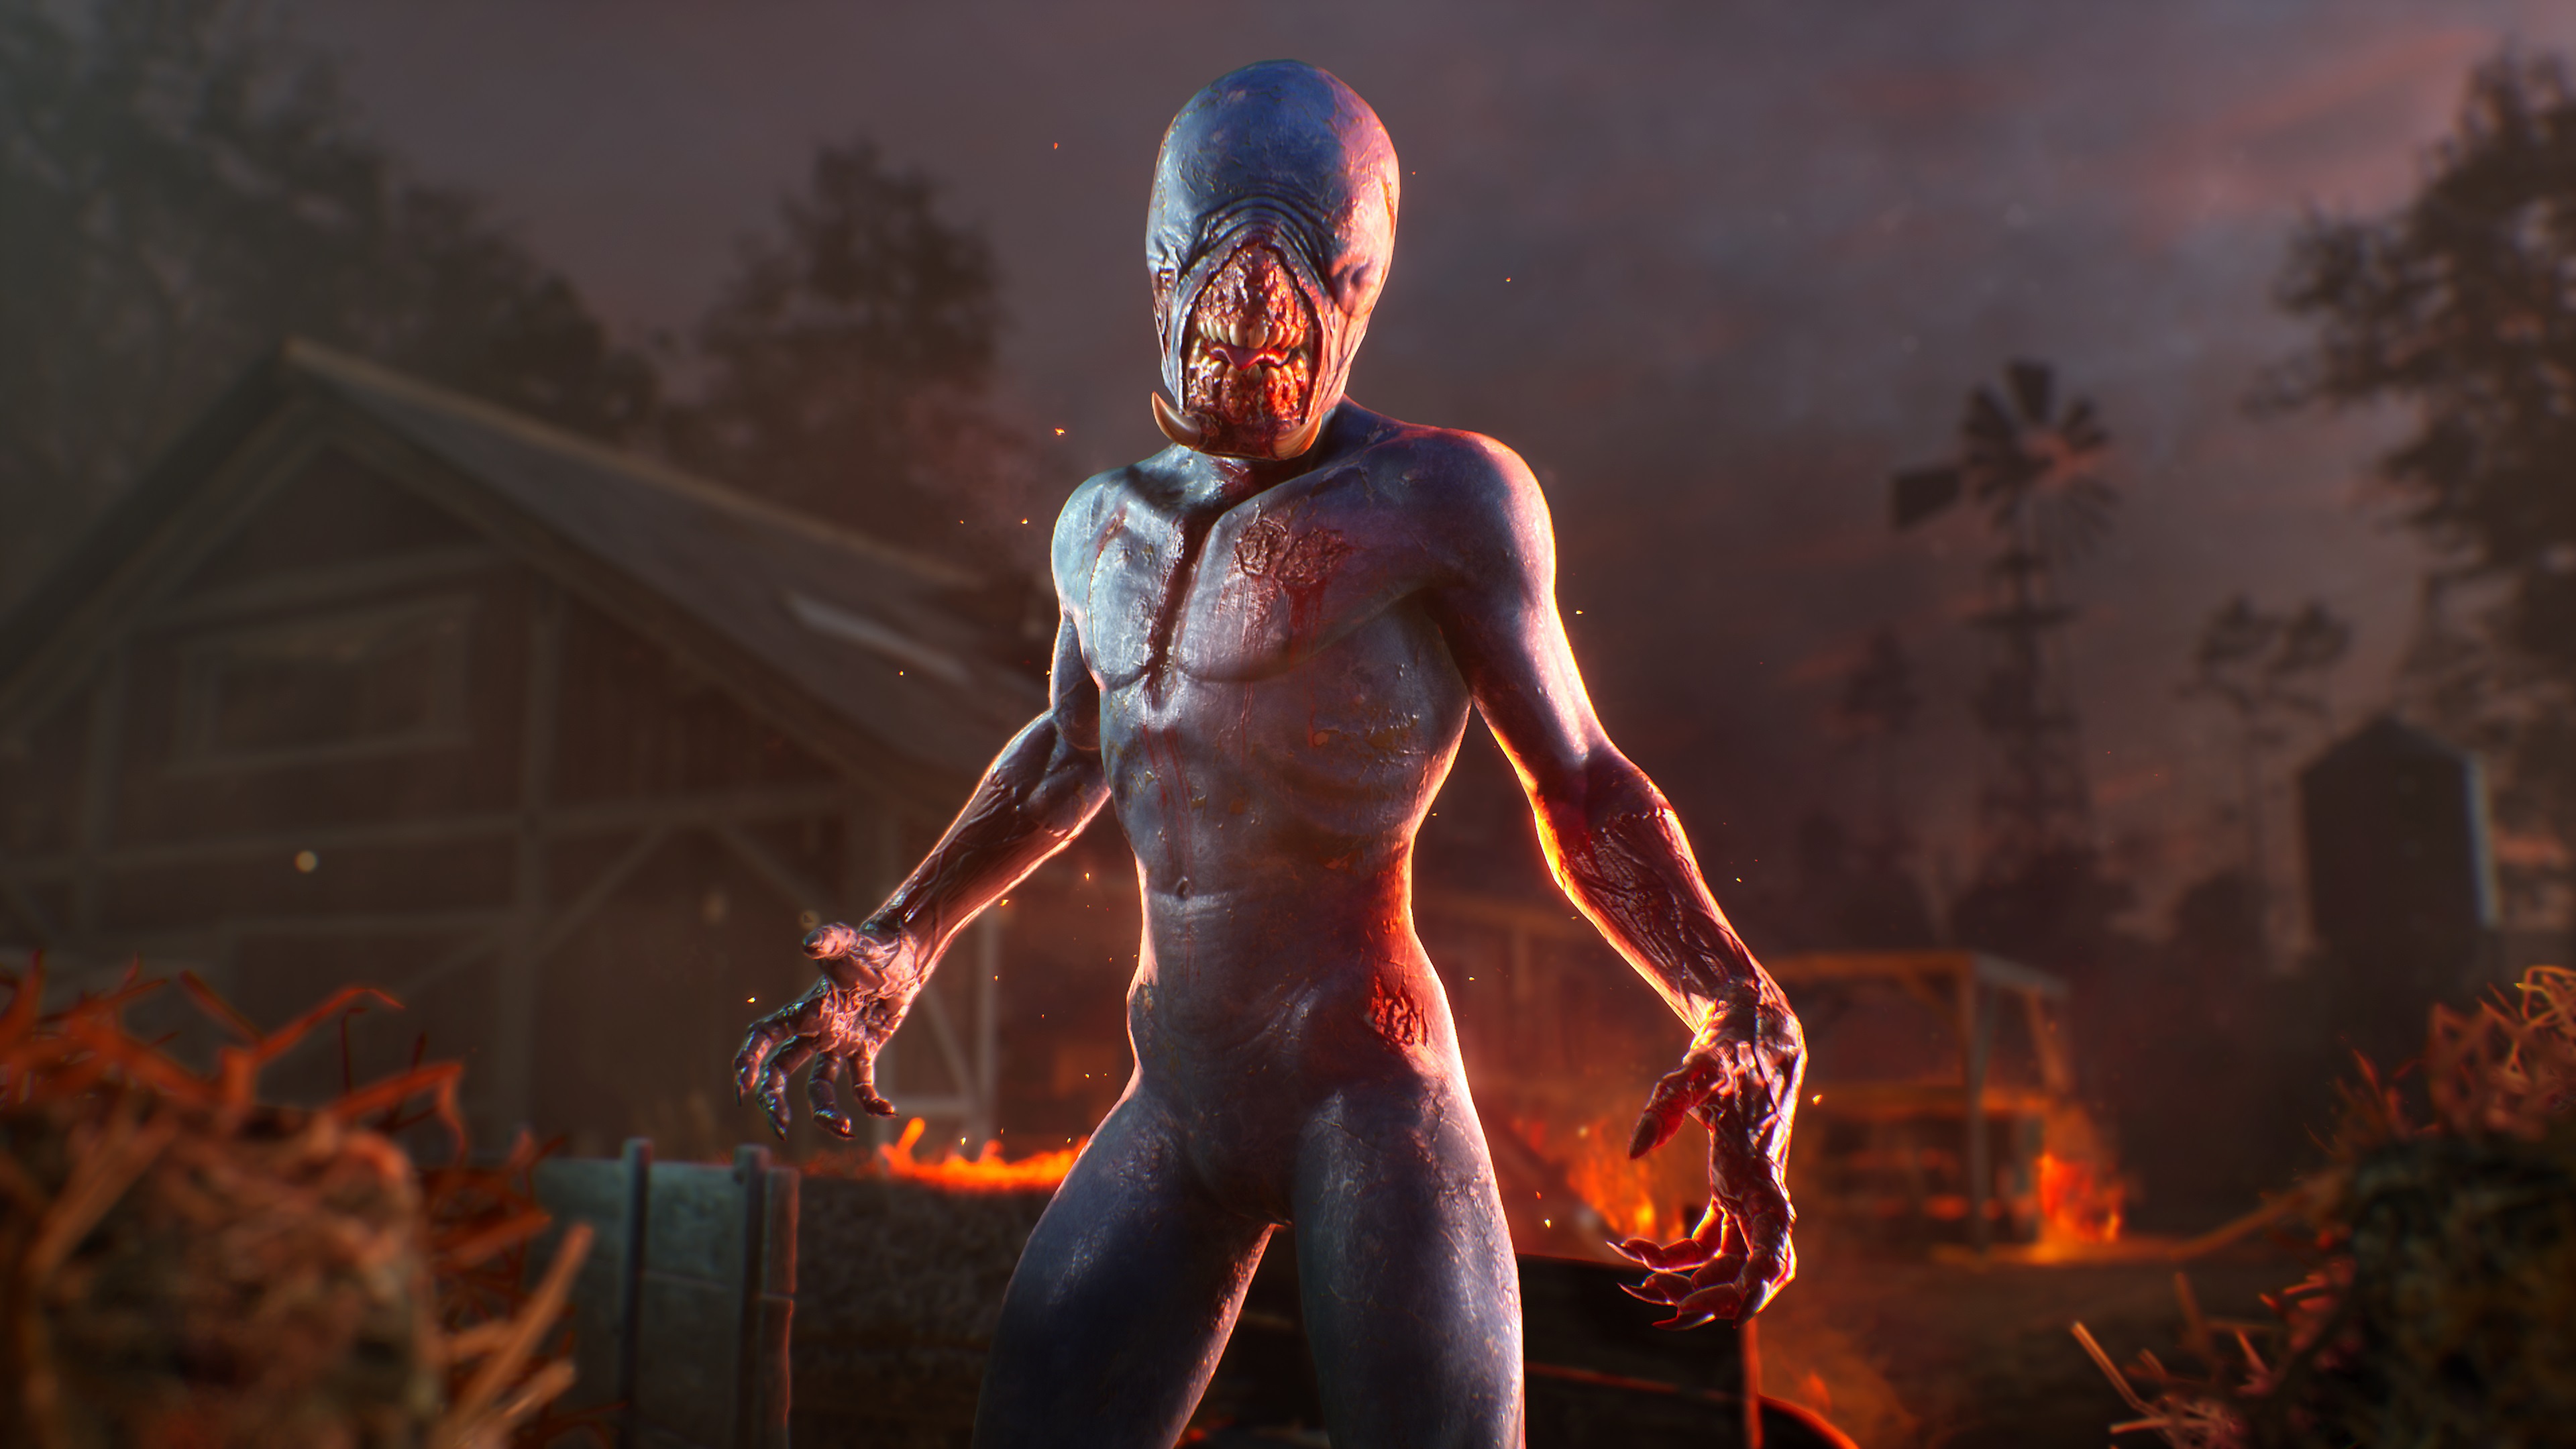 Evil Dead: The Game screenshot featuring a monster-like character